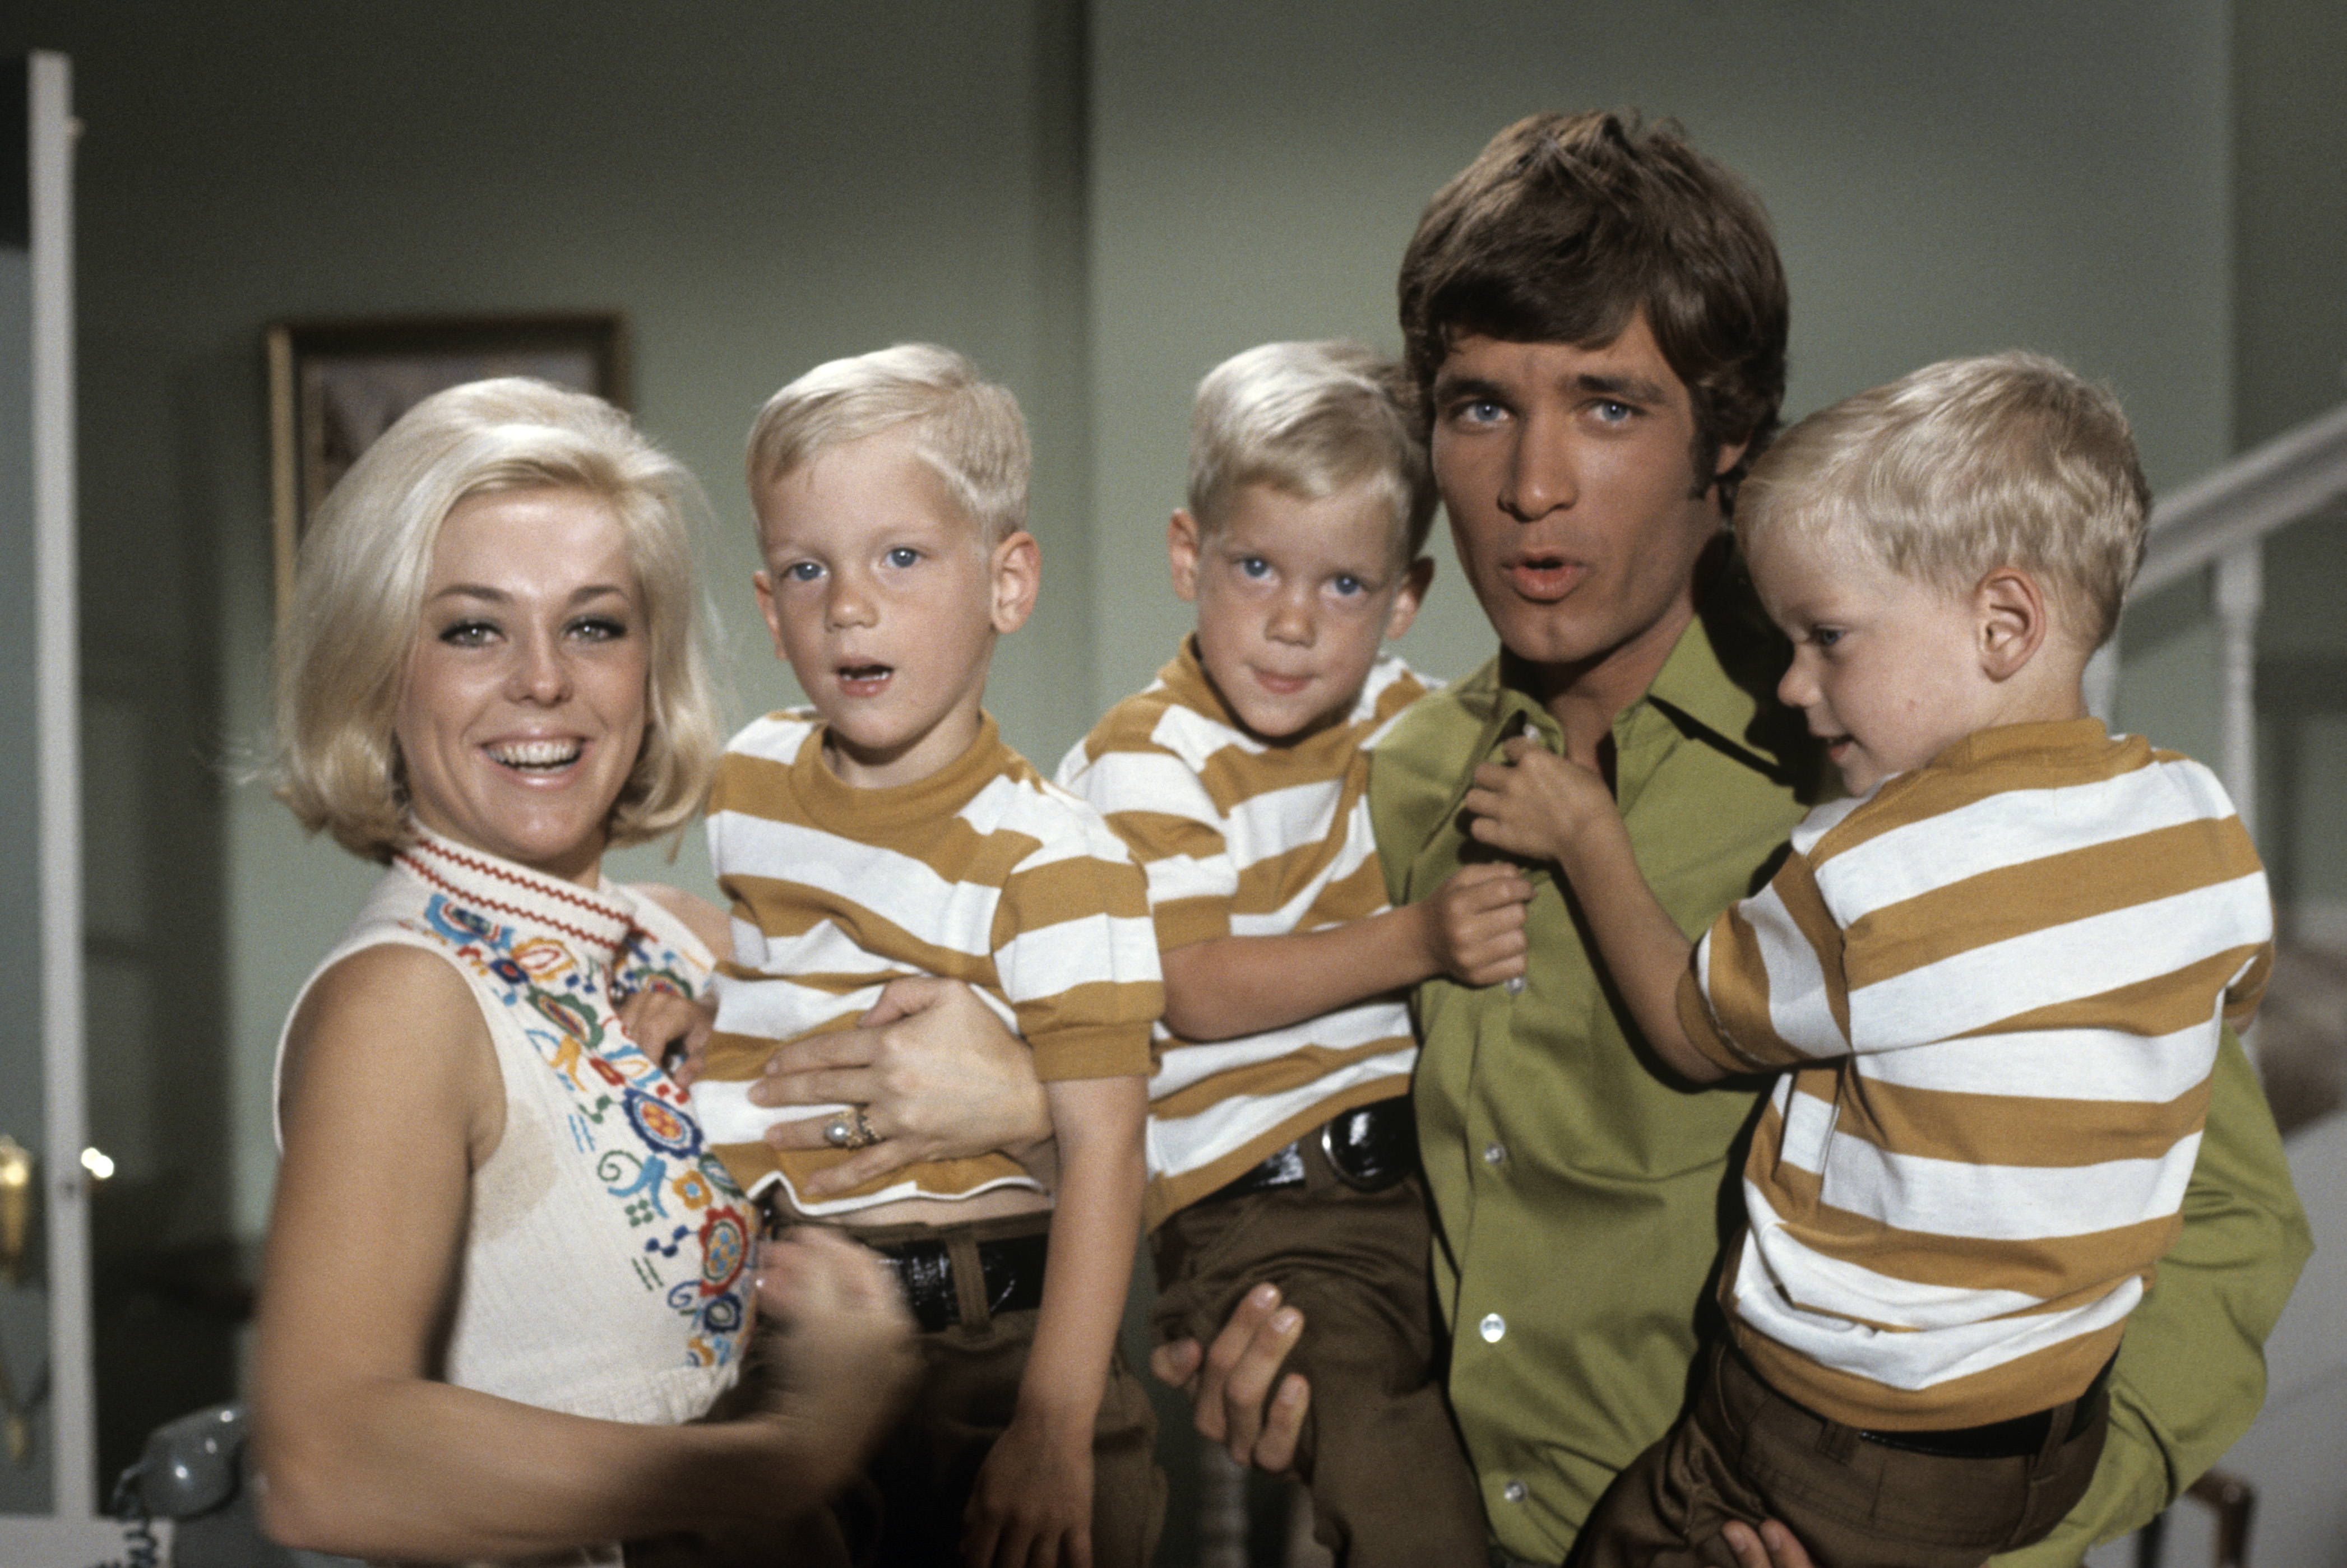 Tina Cole and Don Grady on the set of "My Three Sons." | Source: Getty Images